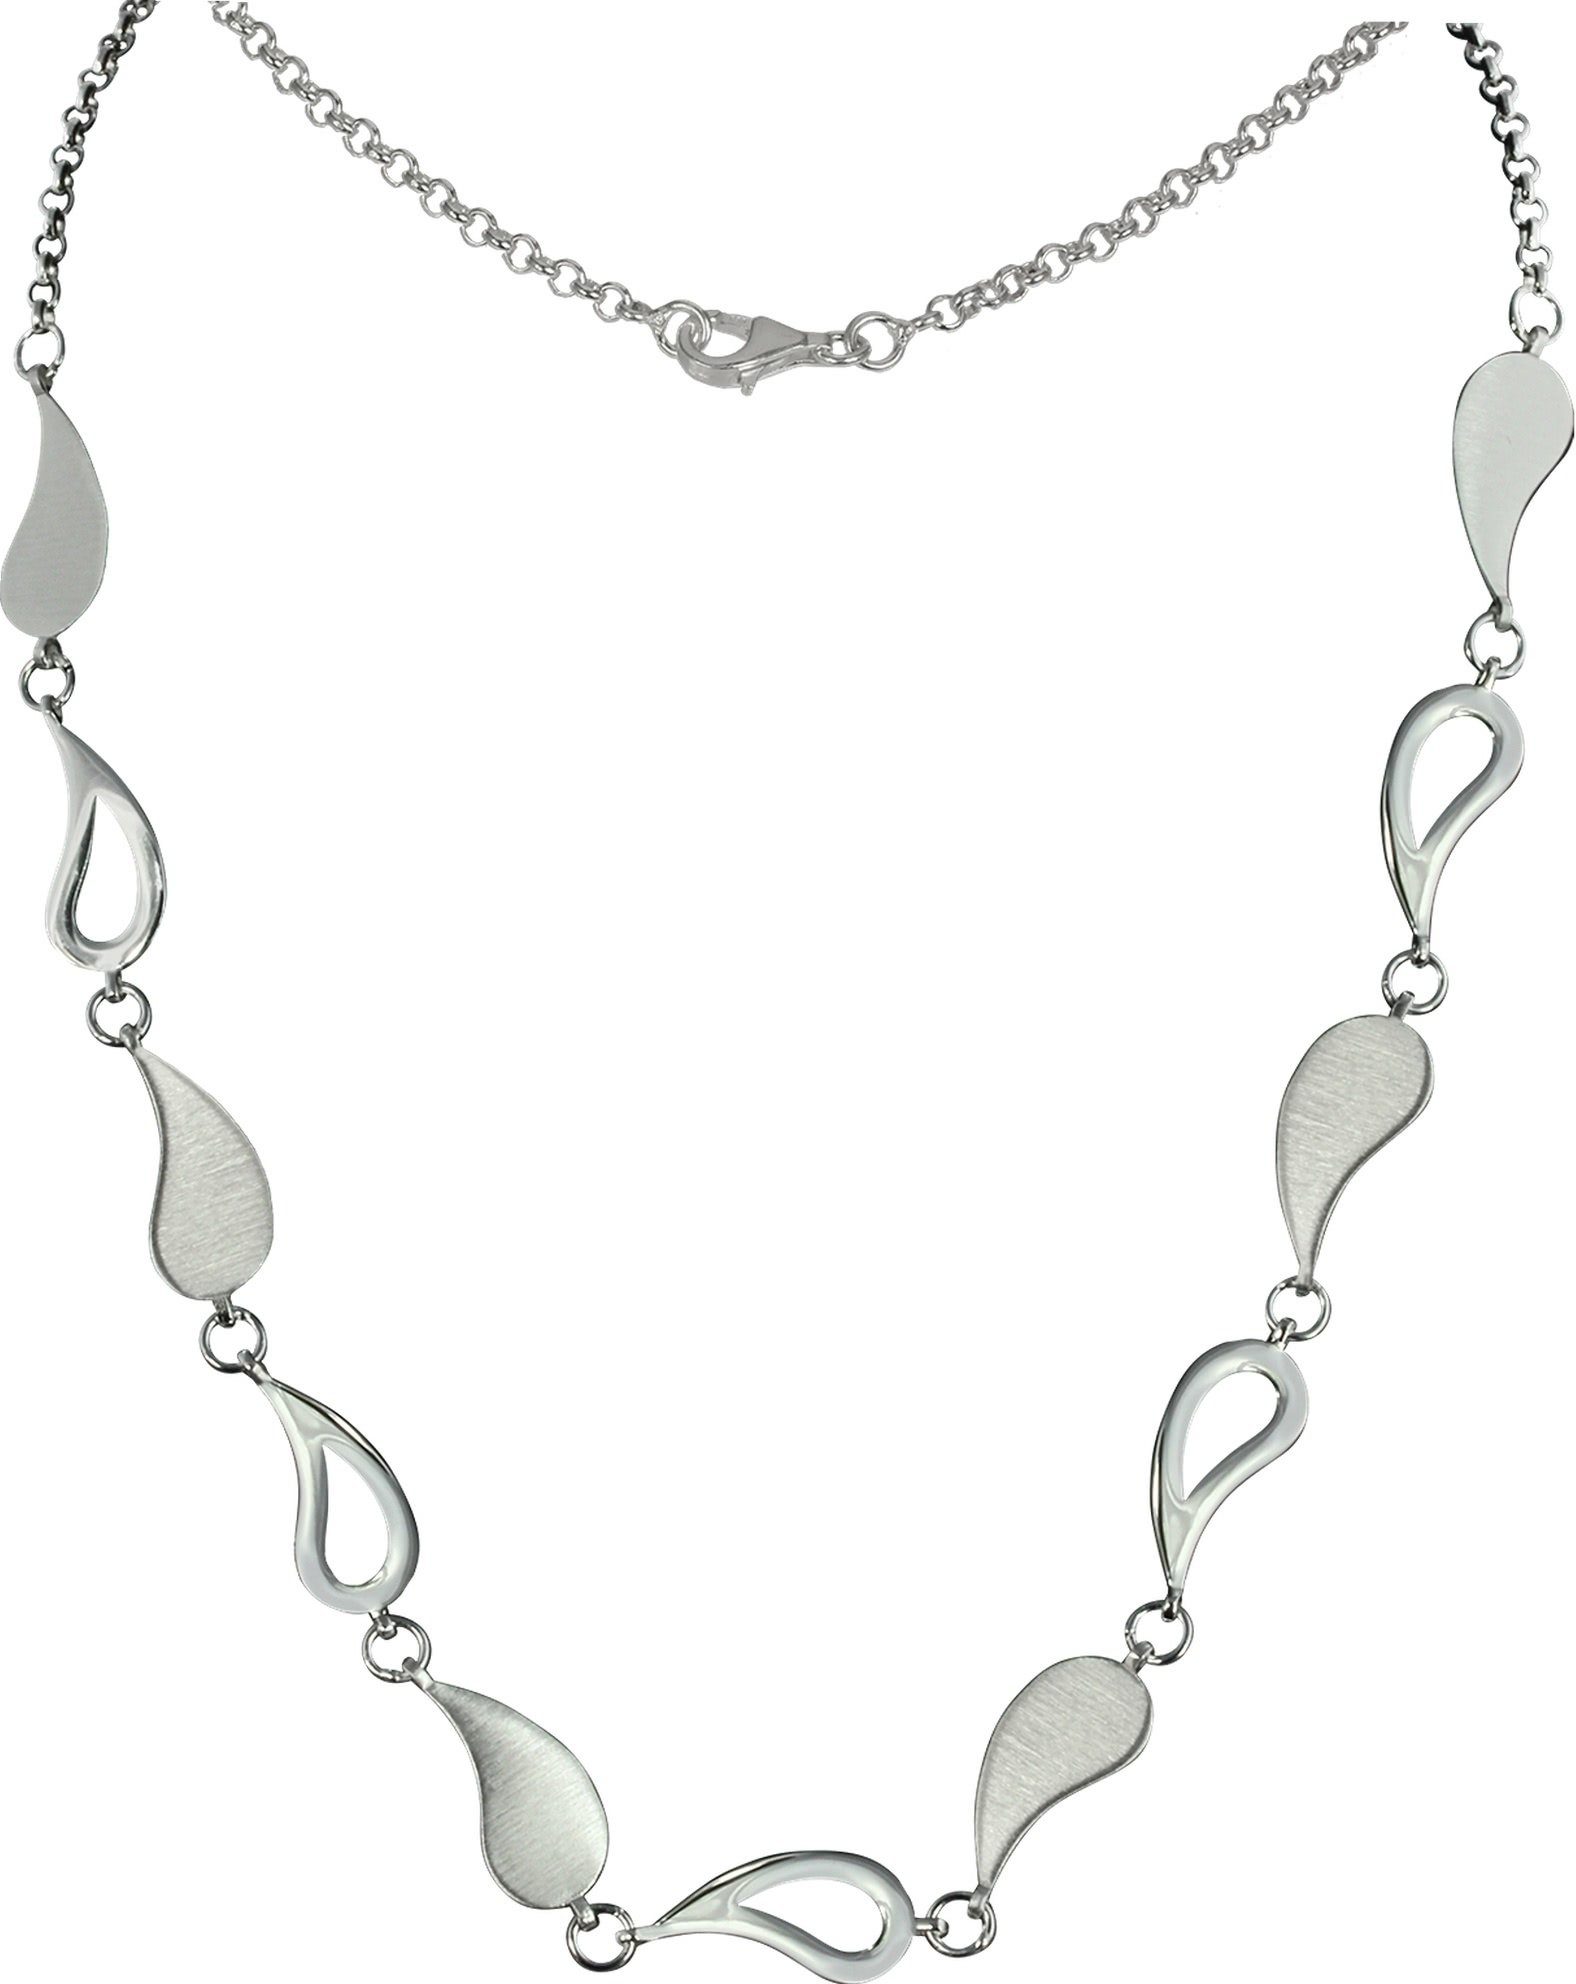 SilberDream Collier SDK4901JX Silber, Sterling verschiedene 925 SilberDream Colliers silber 45cm, Designs, (Träne) Farbe: ca